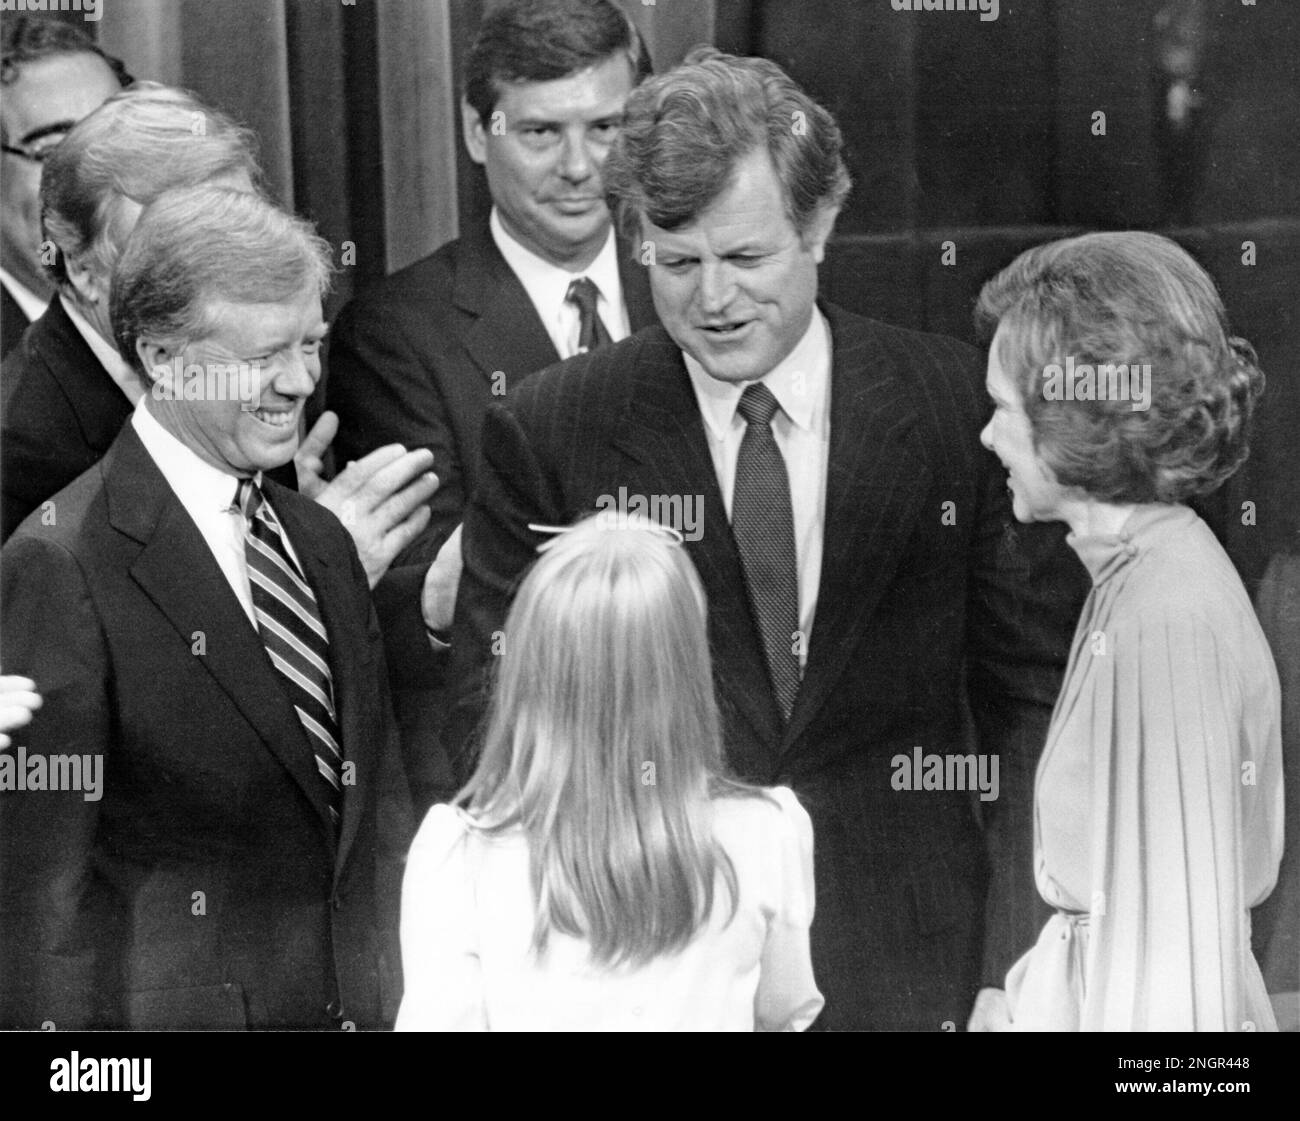 New York, NY - (FILE) -- United States President Jimmy Carter, left, U.S. Senator Edward M. 'Ted' Kennedy (Democrat of Massachusetts), center, first lady Roslyn Carter, right, and Amy Carter, back to camera, on the podium on the last night of the 1980 Democratic National Convention in New York, New York on Thursday, August 14, 1980 in a show of unity after a bruising battle for the party's nomination for President.Credit: Arnie Sachs/CNP Stock Photo